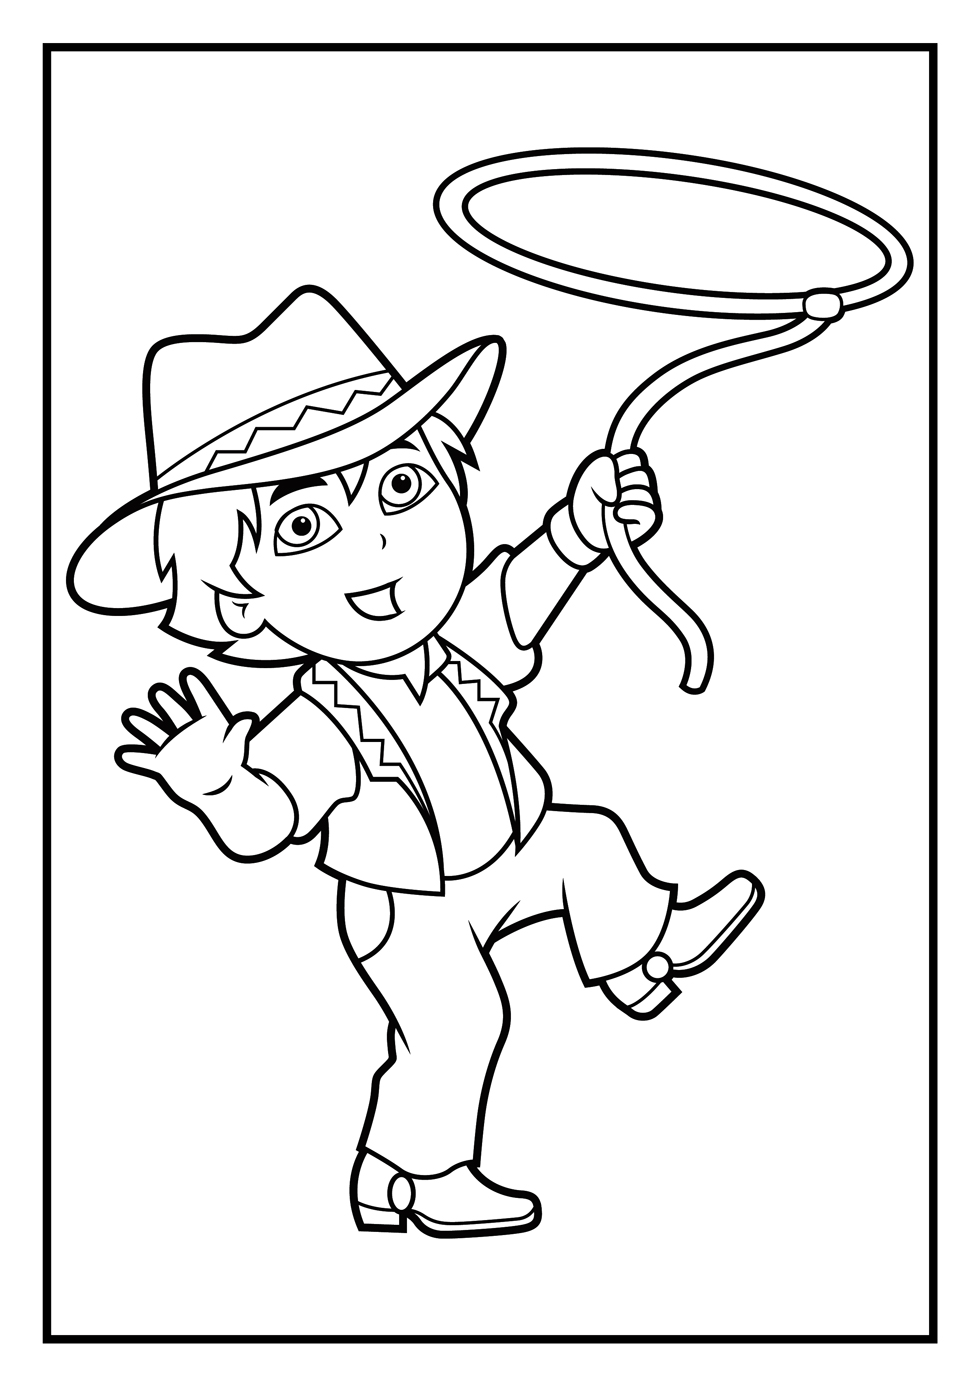 Download Dora Coloring Pages | Diego Coloring Pages